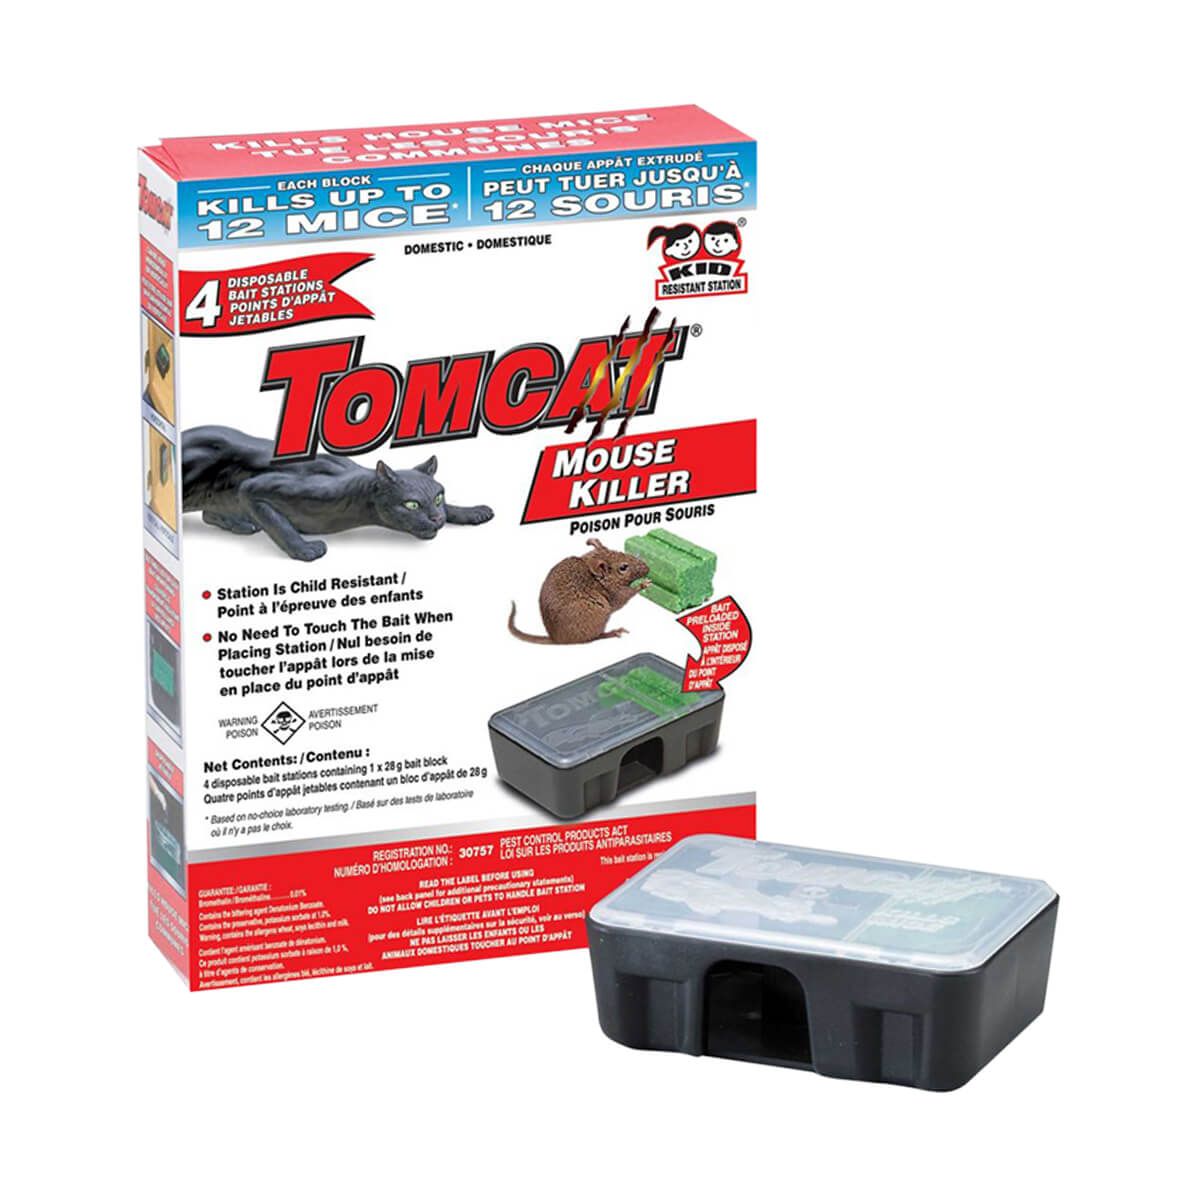 Tomcat Mouse Bait Station Domestic - 4 Pack